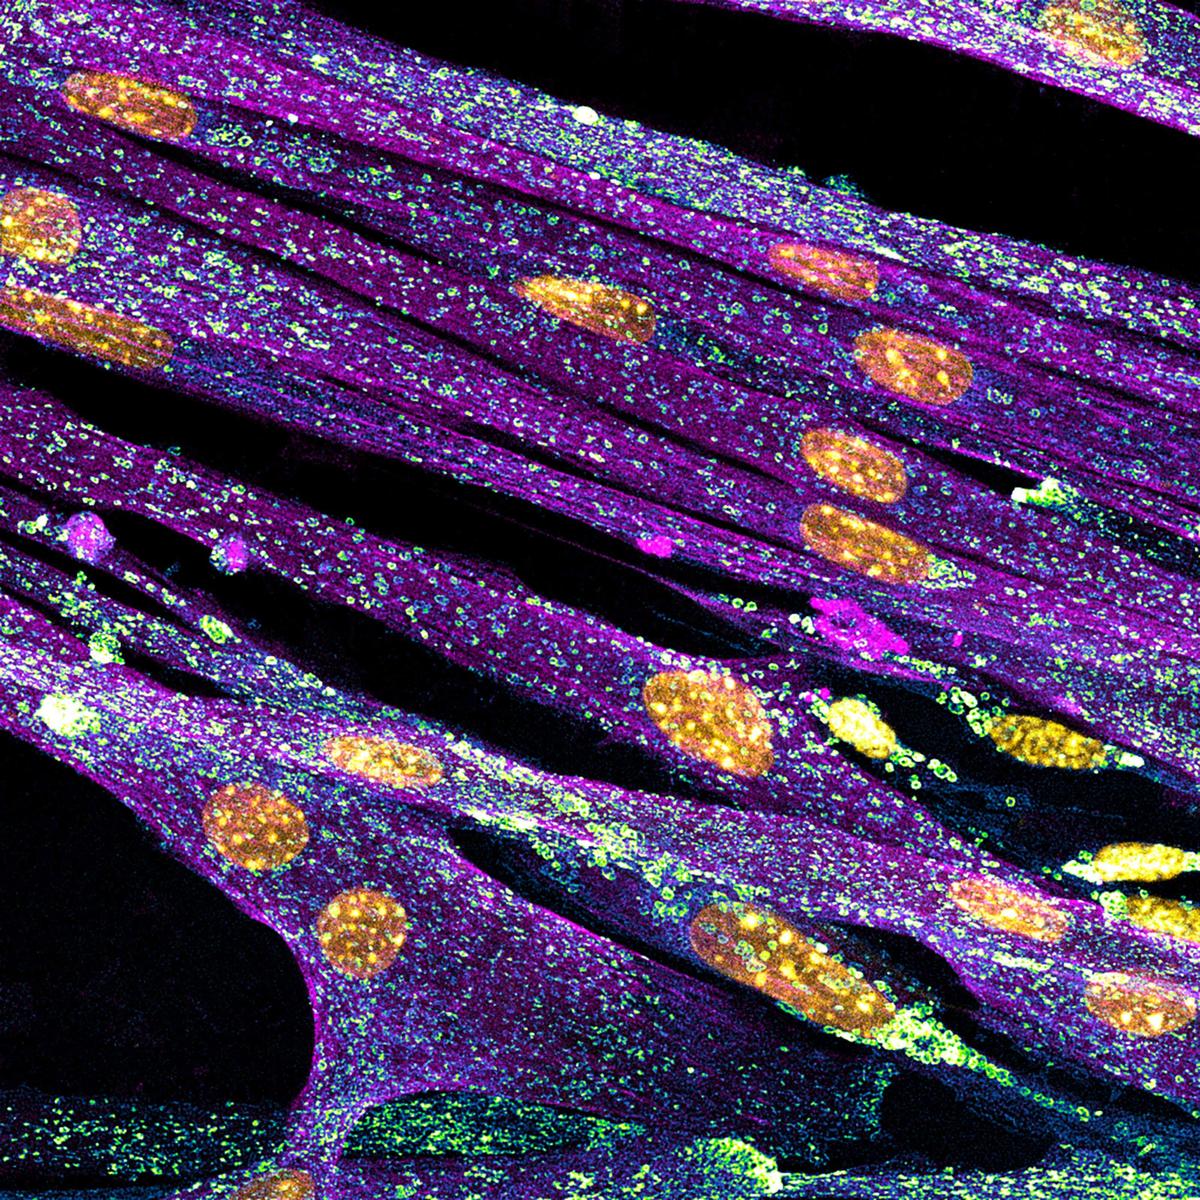 Differentiated cultured mouse myoblasts with lysosomes (cyan/green), nuclei (yellow), and F-actin (magenta), taken by Nadia Efimova. (Courtesy of Nadia Efimova and Nikon Small World)